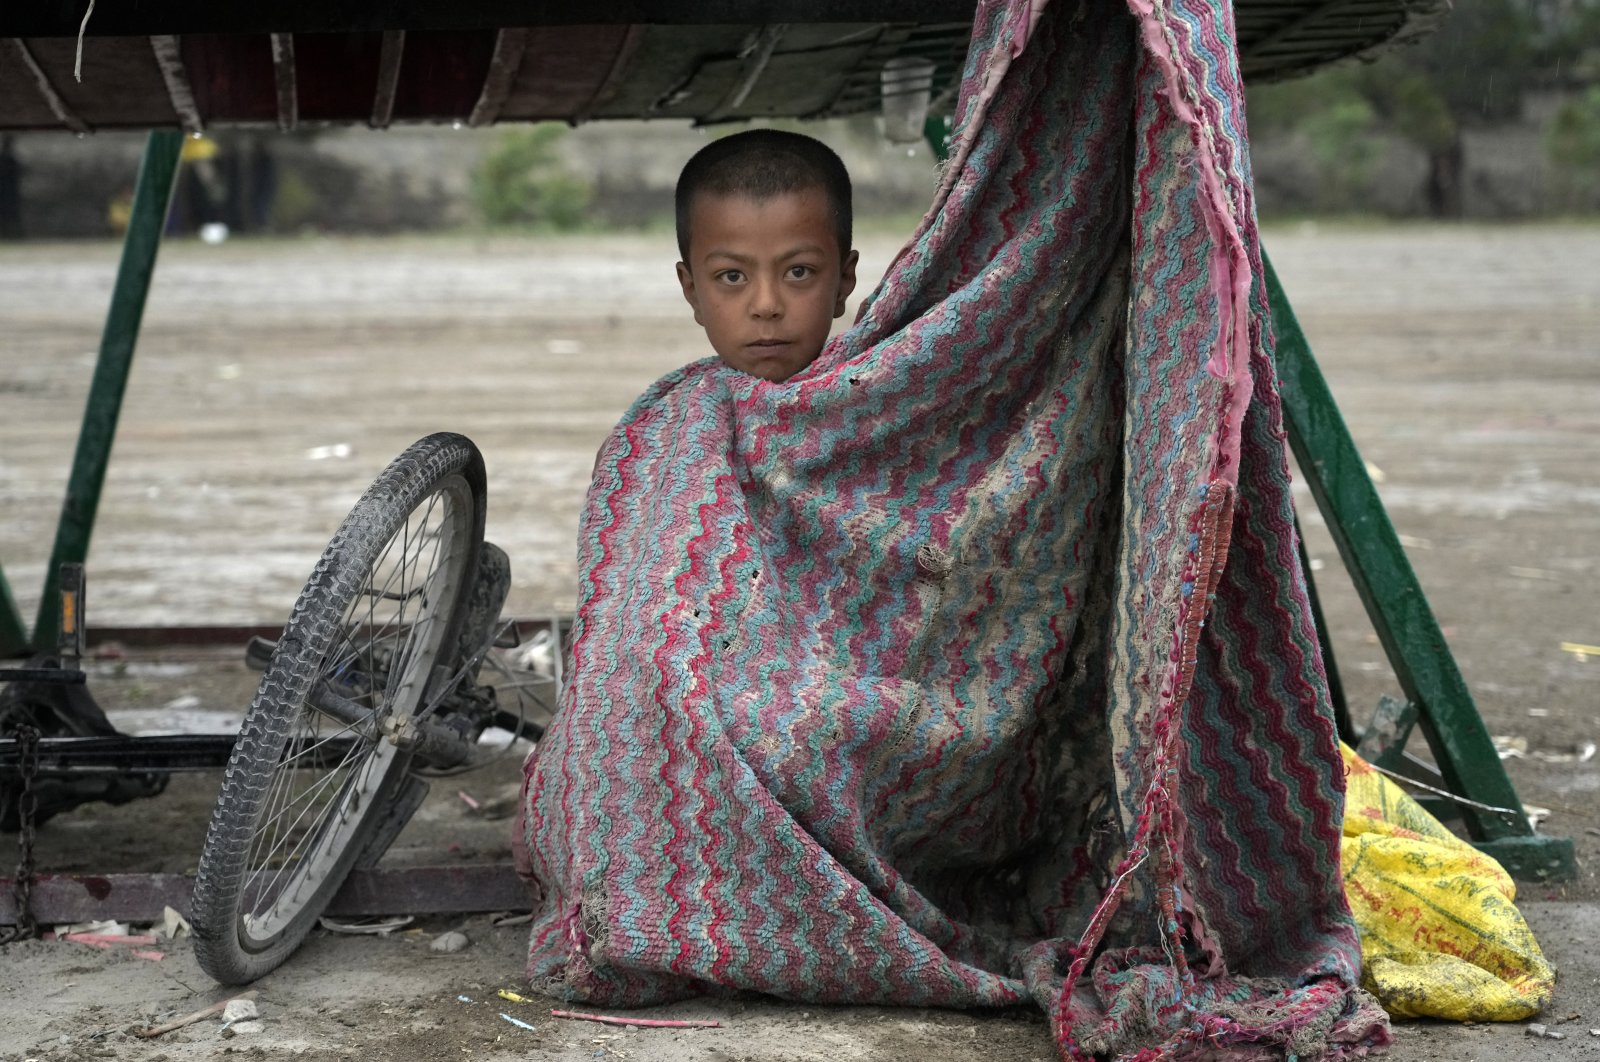 A child shelters from the rain under a wheelbarrow in the city of Kabul, Afghanistan, May 3, 2022. (AP Photo)